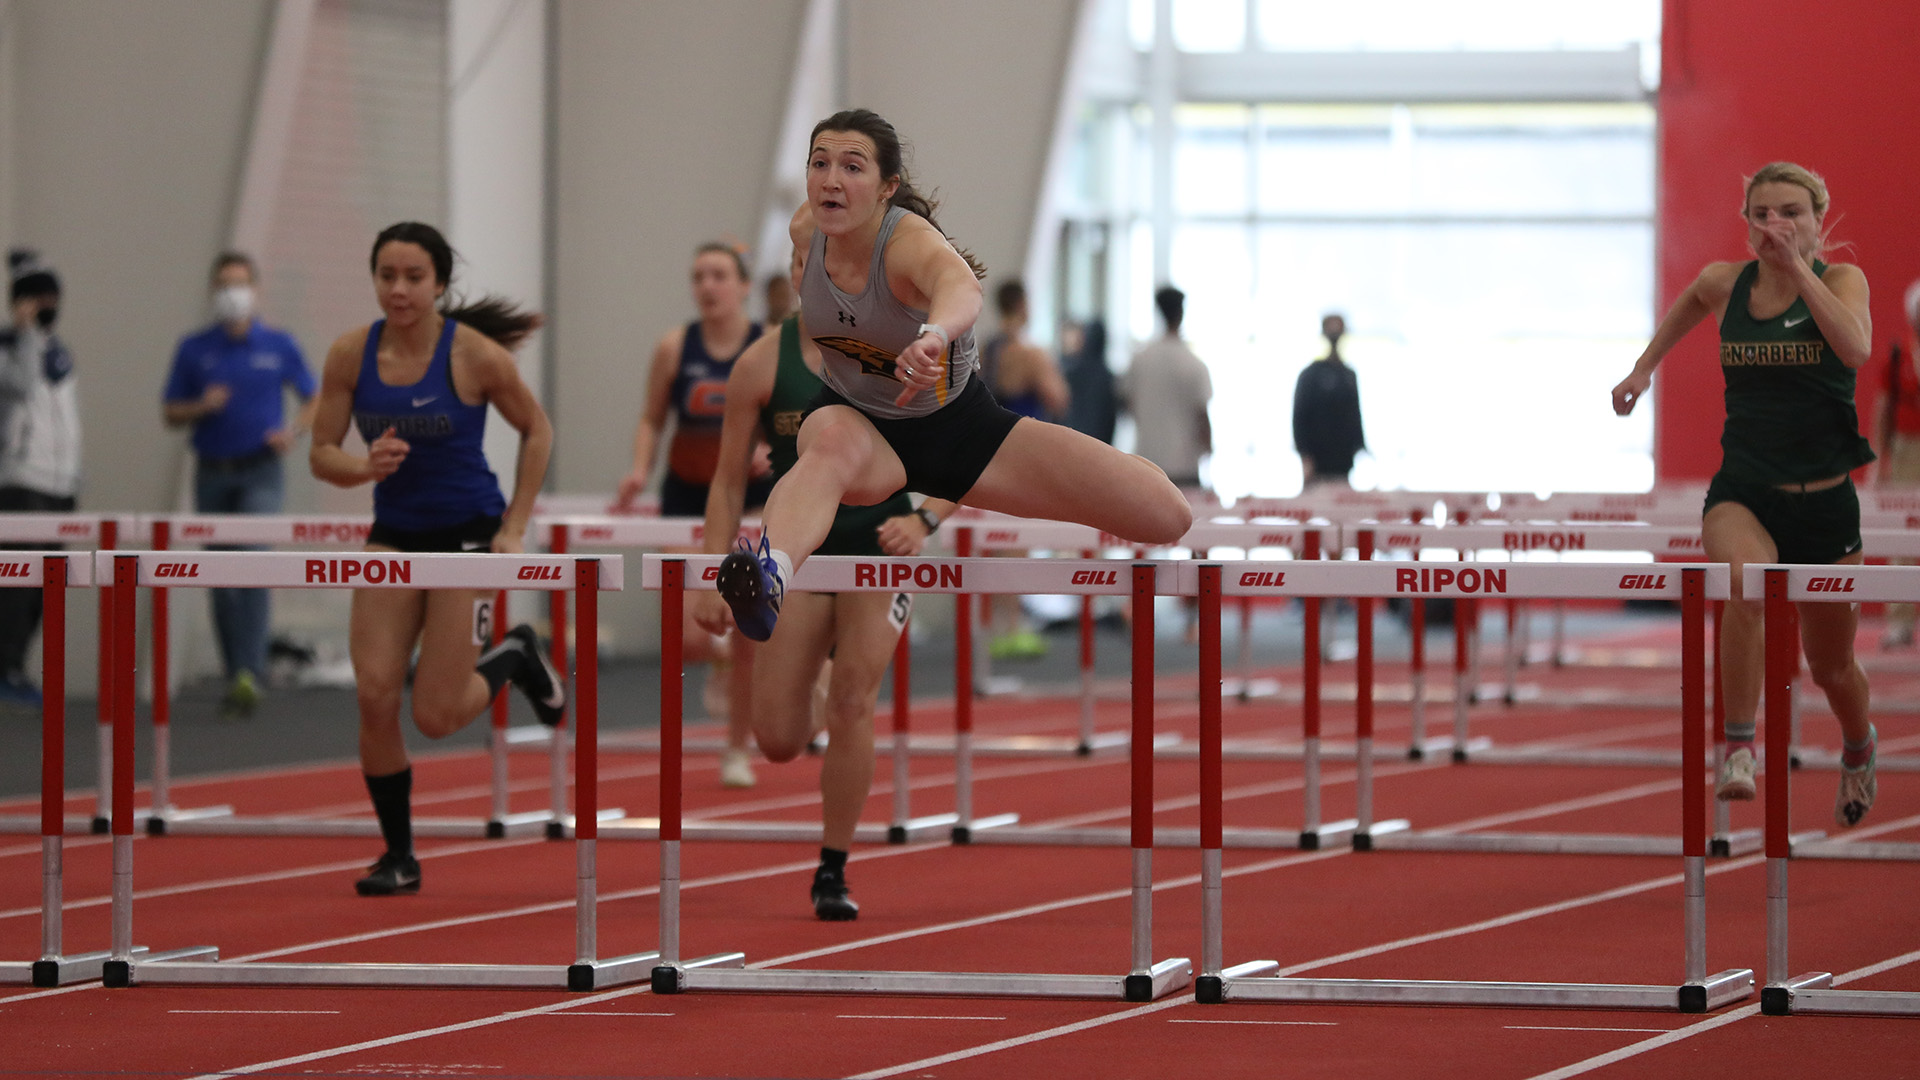 Riley Kindt moved to second nationally in the long jump, 15th in the 60-meter hurdles and 20th in the high jump with her performances at the UW-Whitewater Midwest ELITE Invitational.